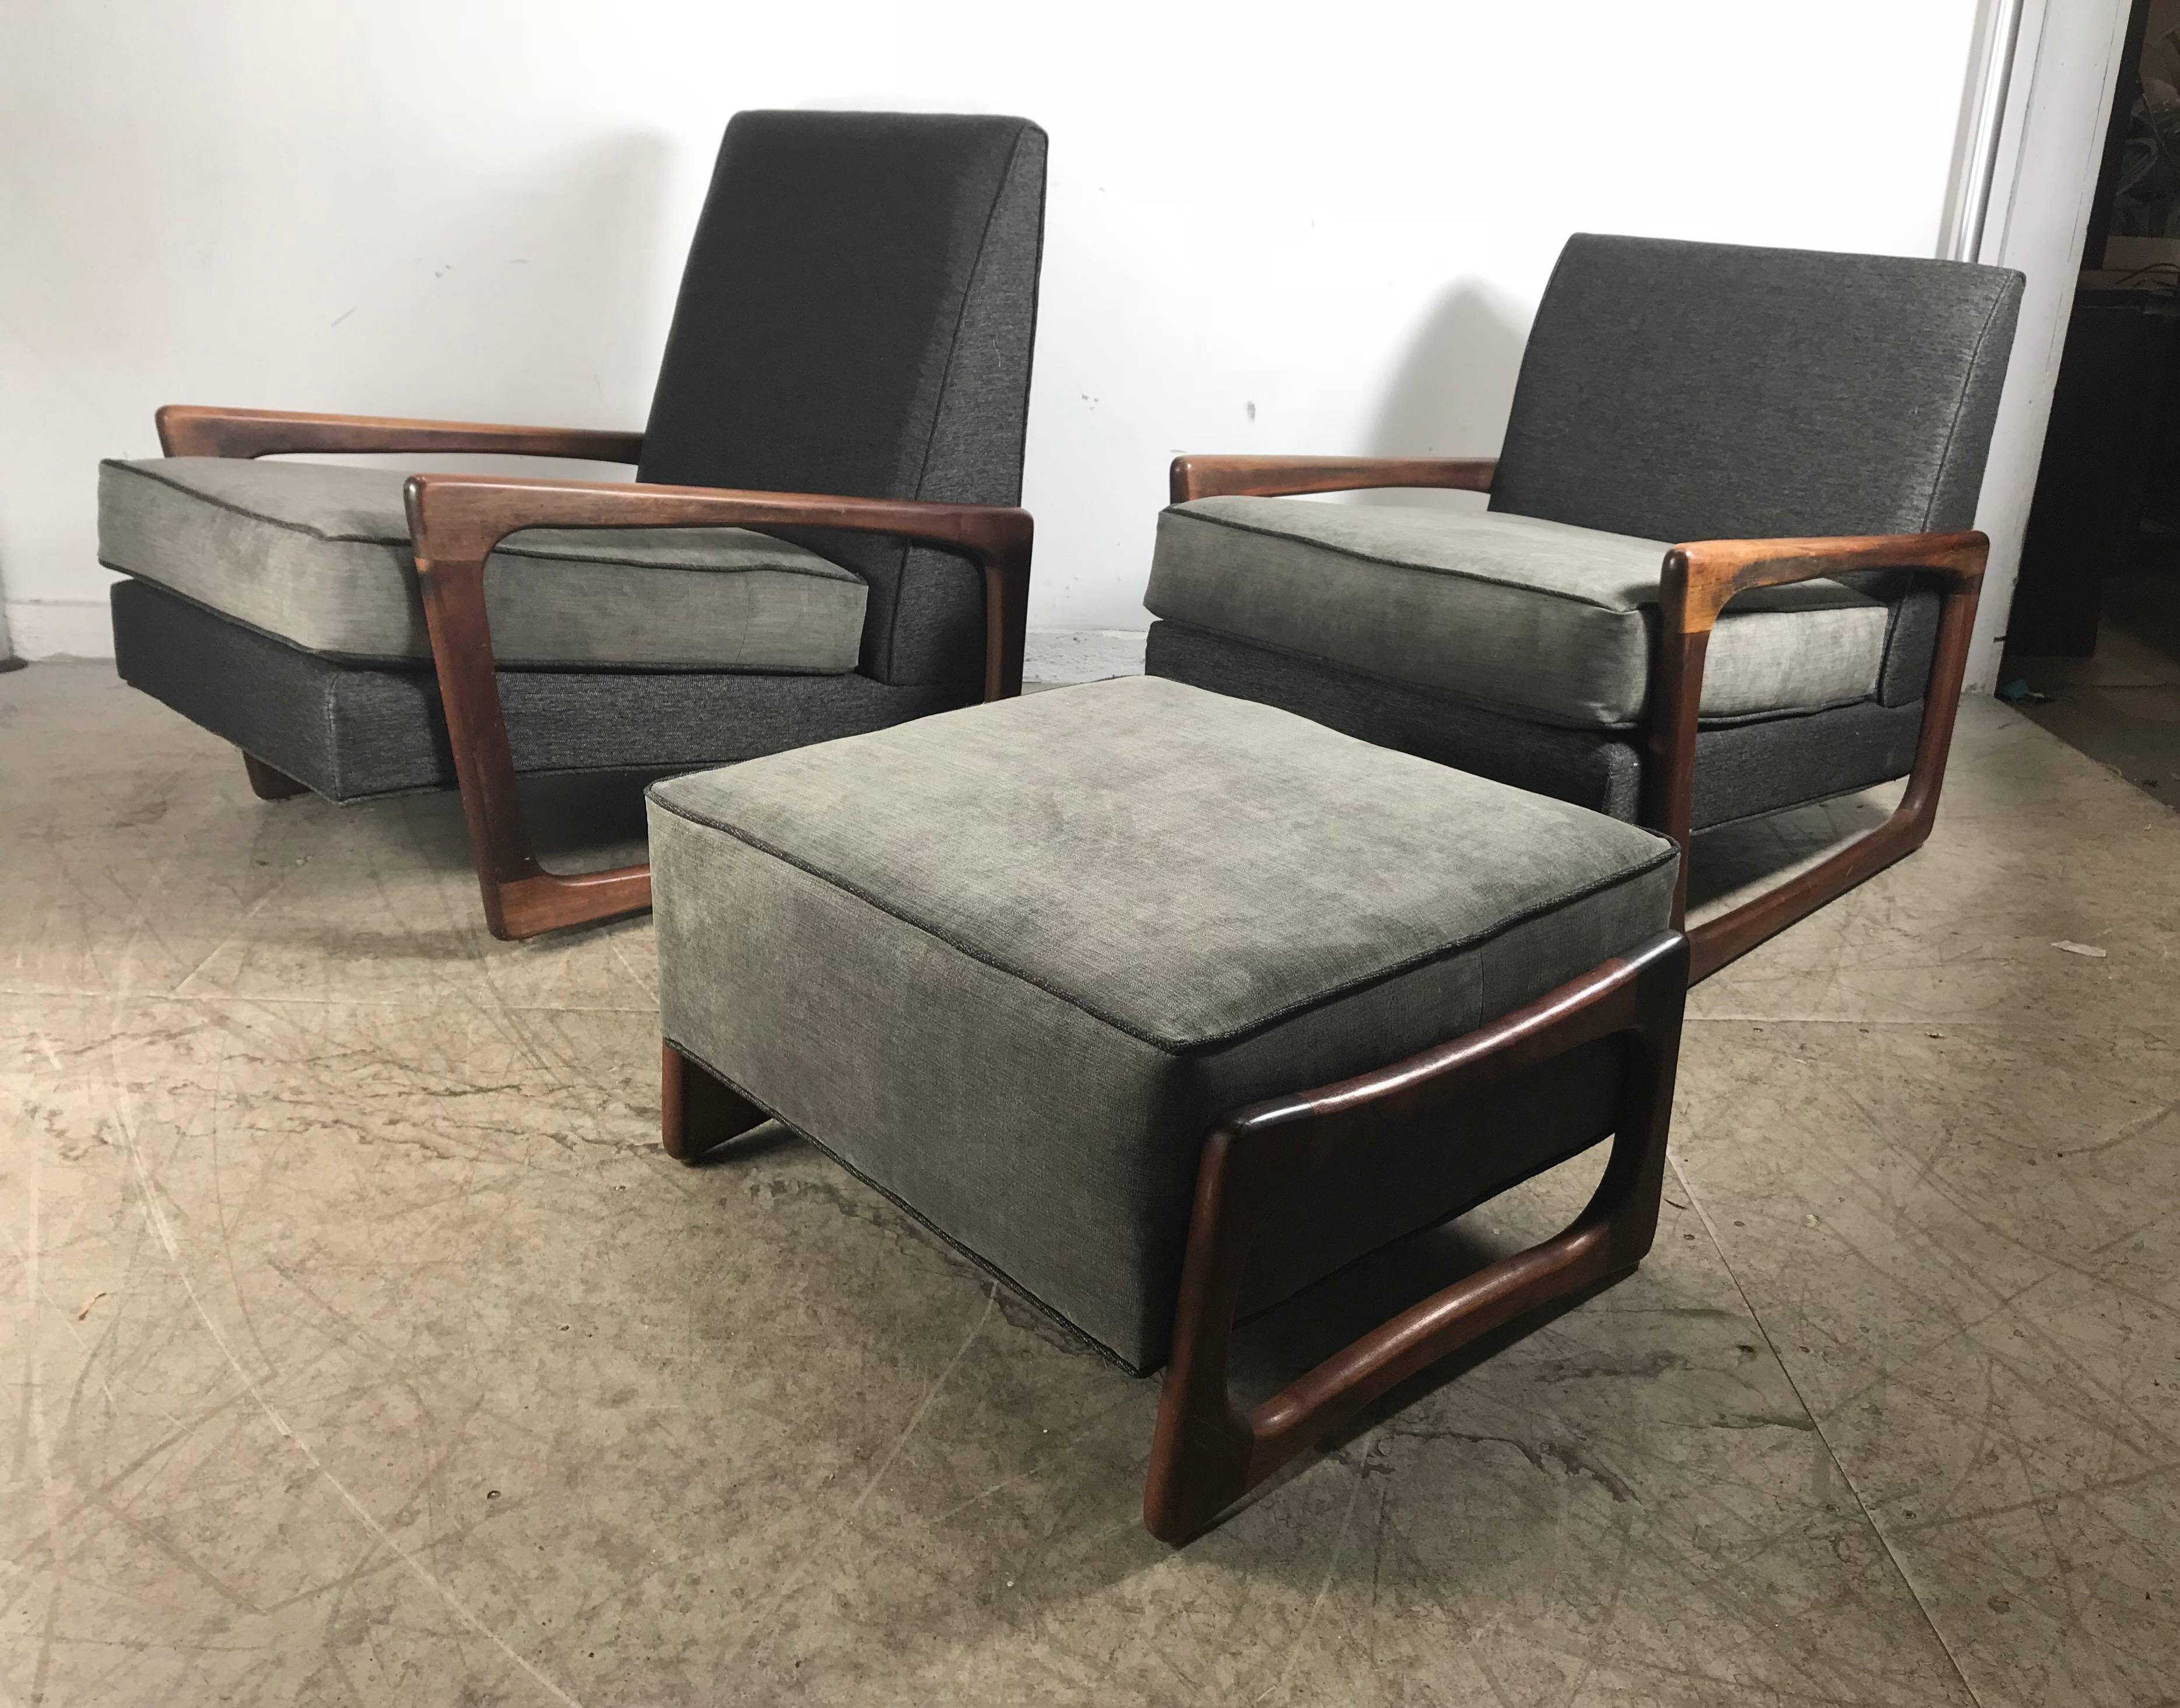 American Stunning Classic Modernist Sculptural Lounge Chairs and Ottoman Adrian Pearsall